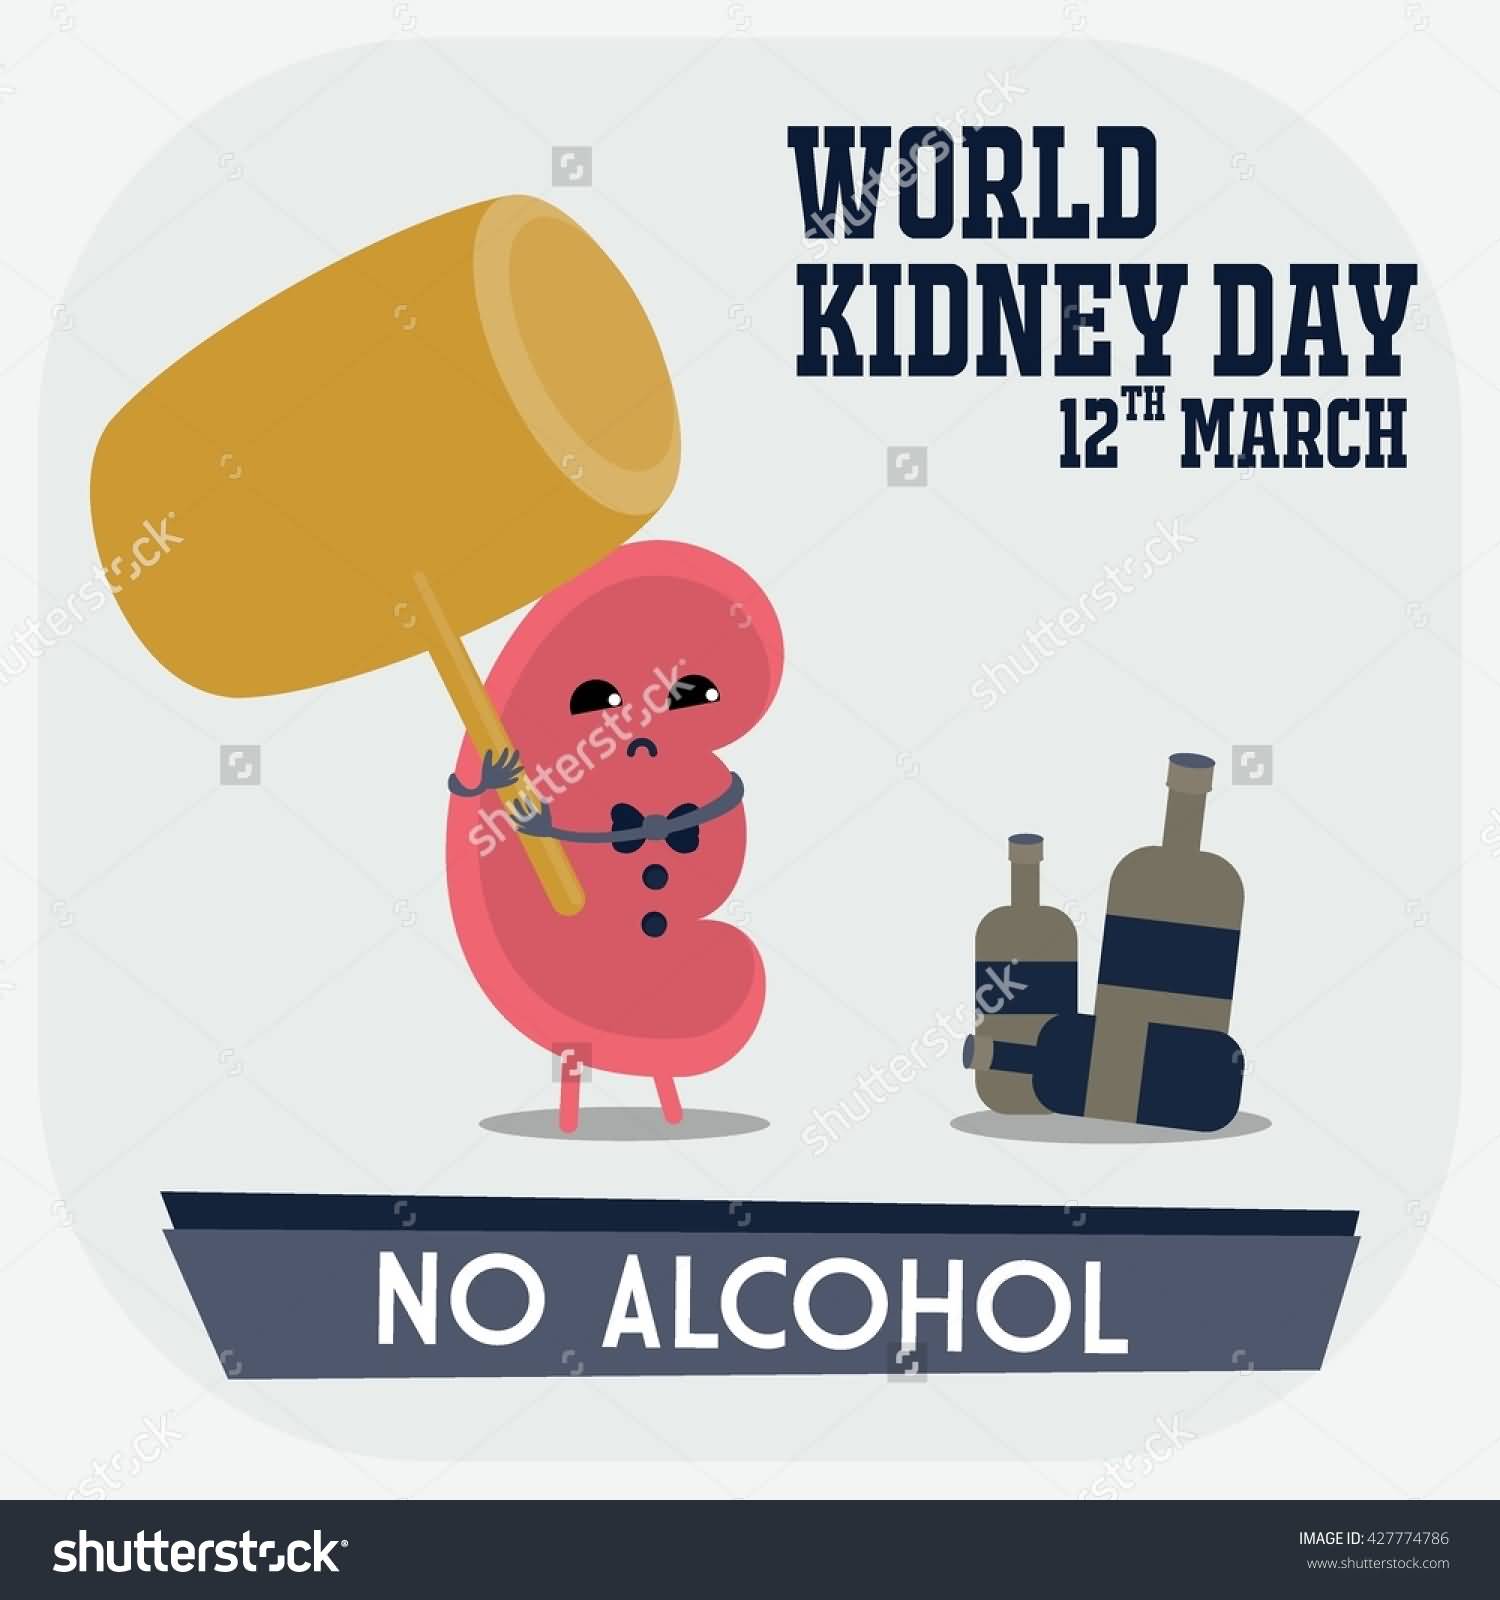 World Kidney Day 12th March No Alcohol Illustration